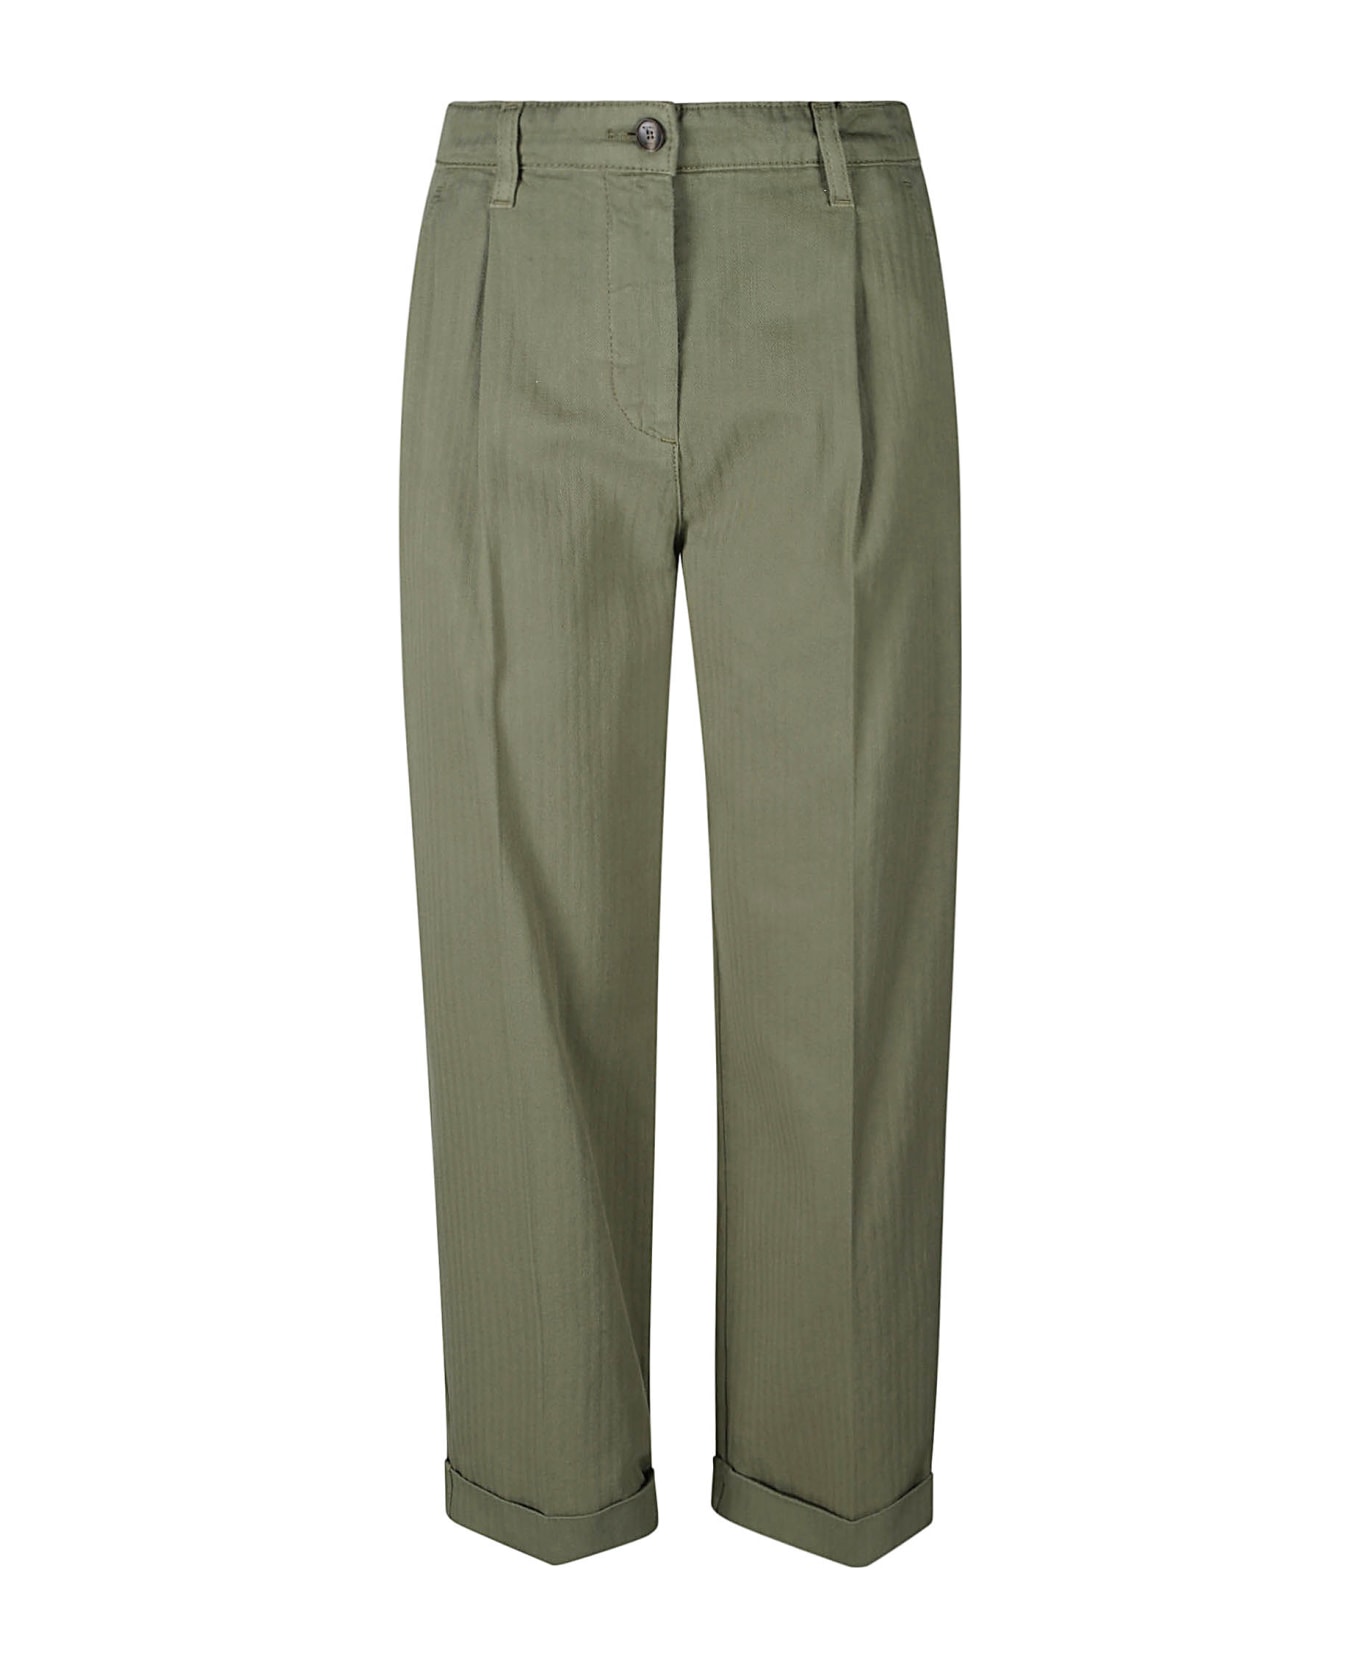 Etro Cropped Chino Trousers - Green ボトムス